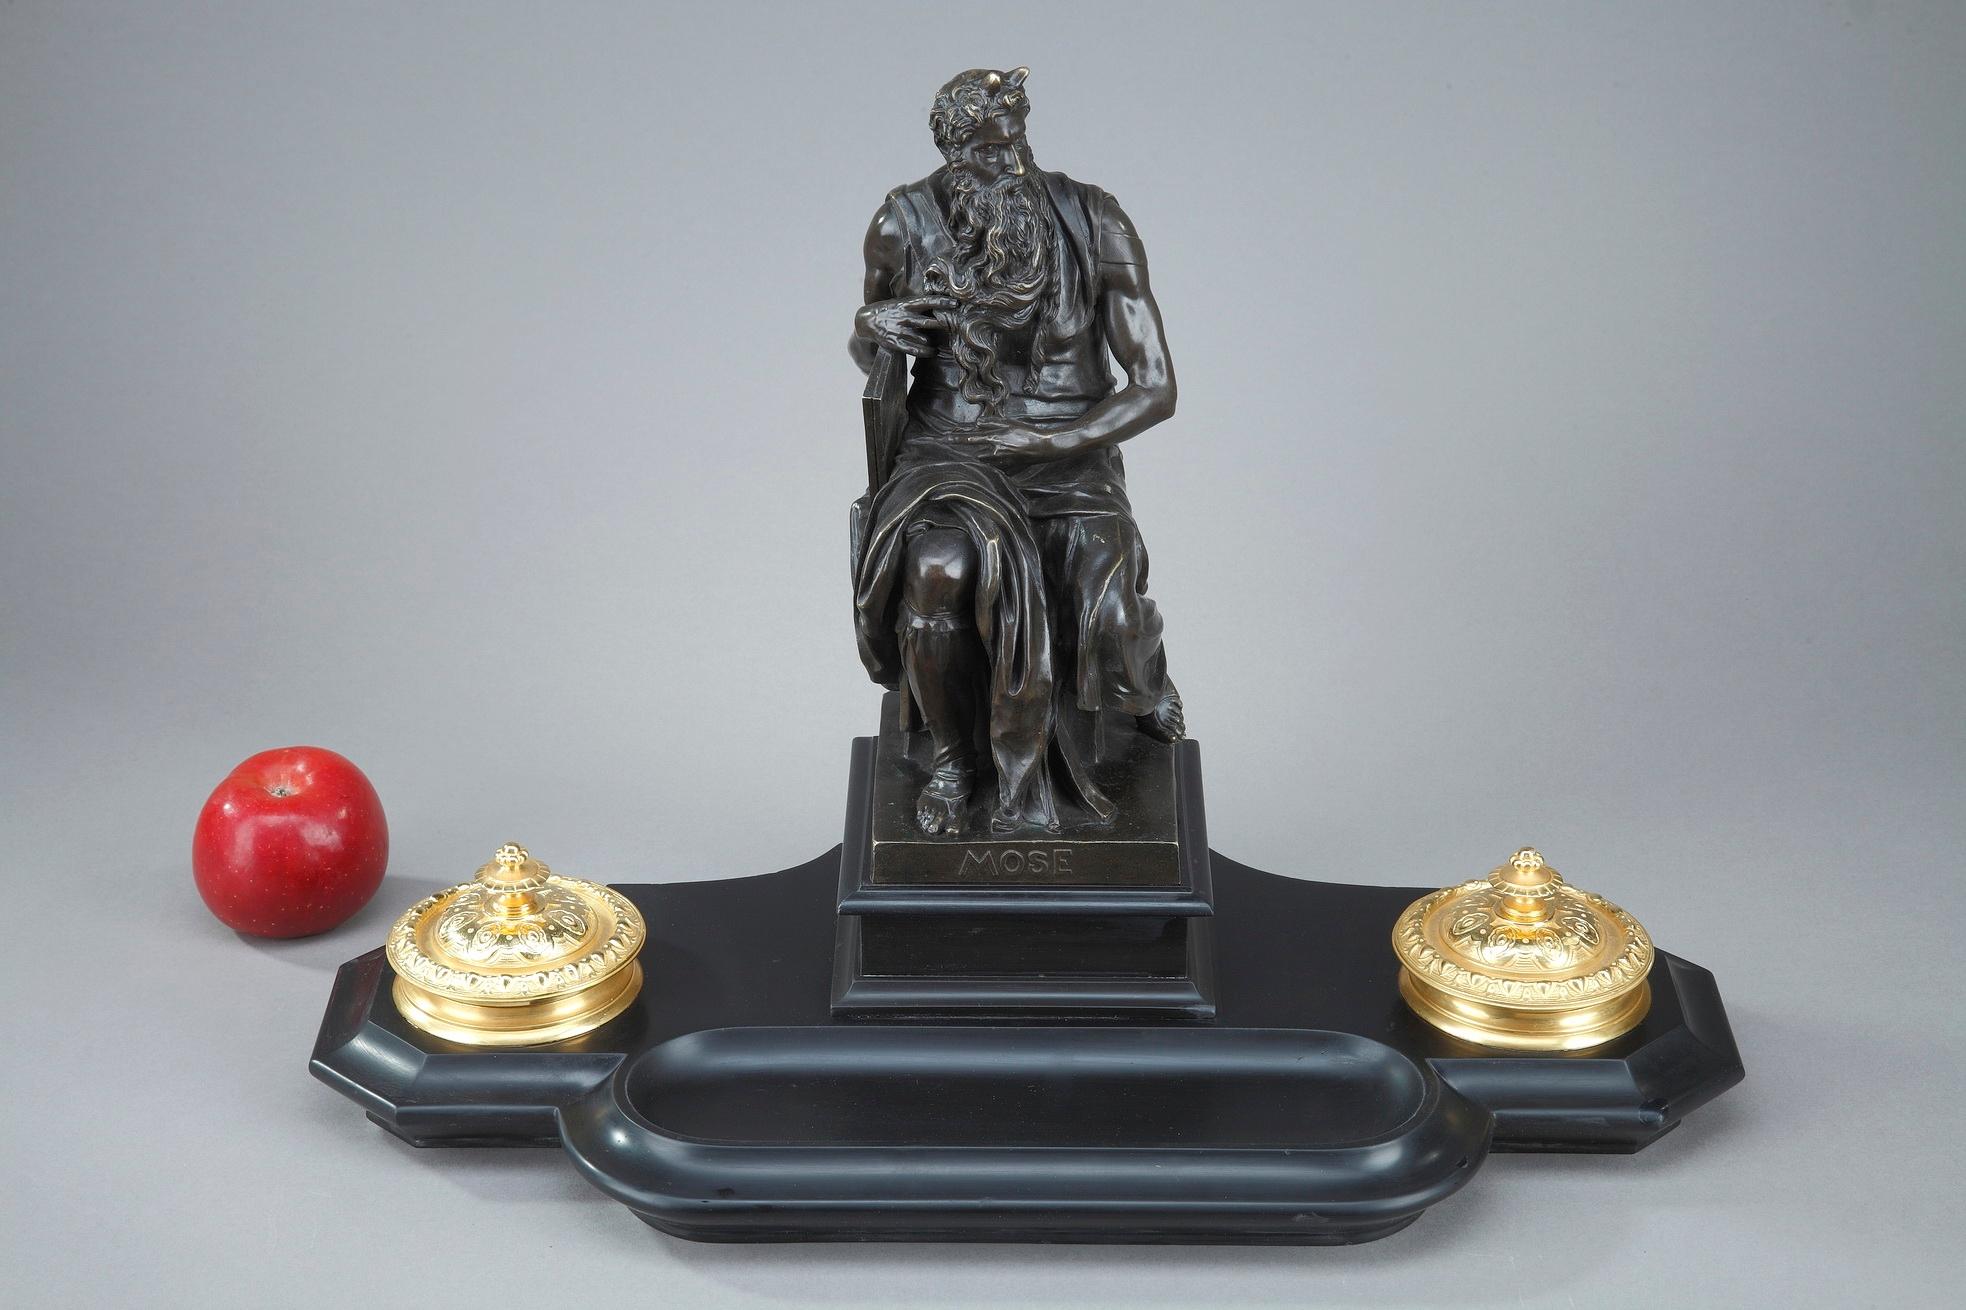 19th century black marble inkwell surmounted by a patinated bronze statue featuring Moses by Michelangelo. The statue of Moses, commissioned in 1505 by Pope Julius II for his tomb and housed in the church of San Pietro in Rome, is a masterpiece of